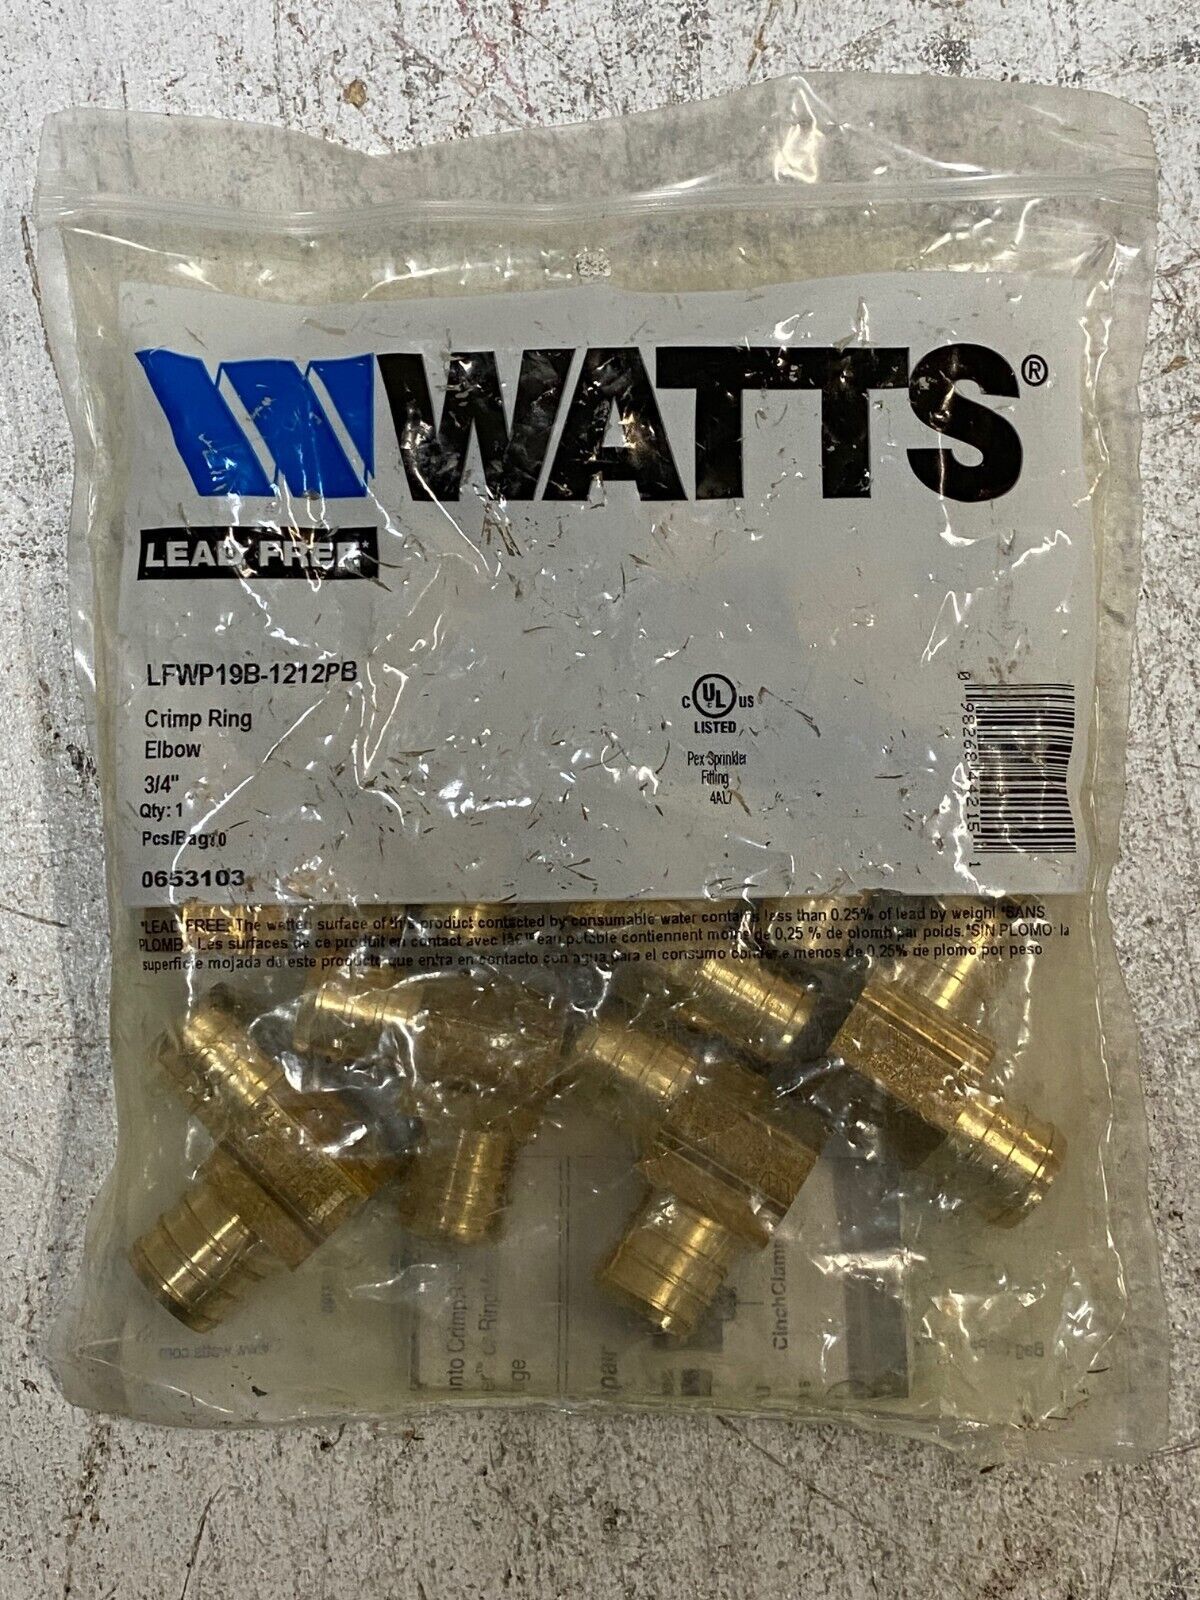 Primary image for 10 Qty of Watts LFWP19B-1212PB Elbow Crimp Rings 3/4" 0653103 (10 Quantity)